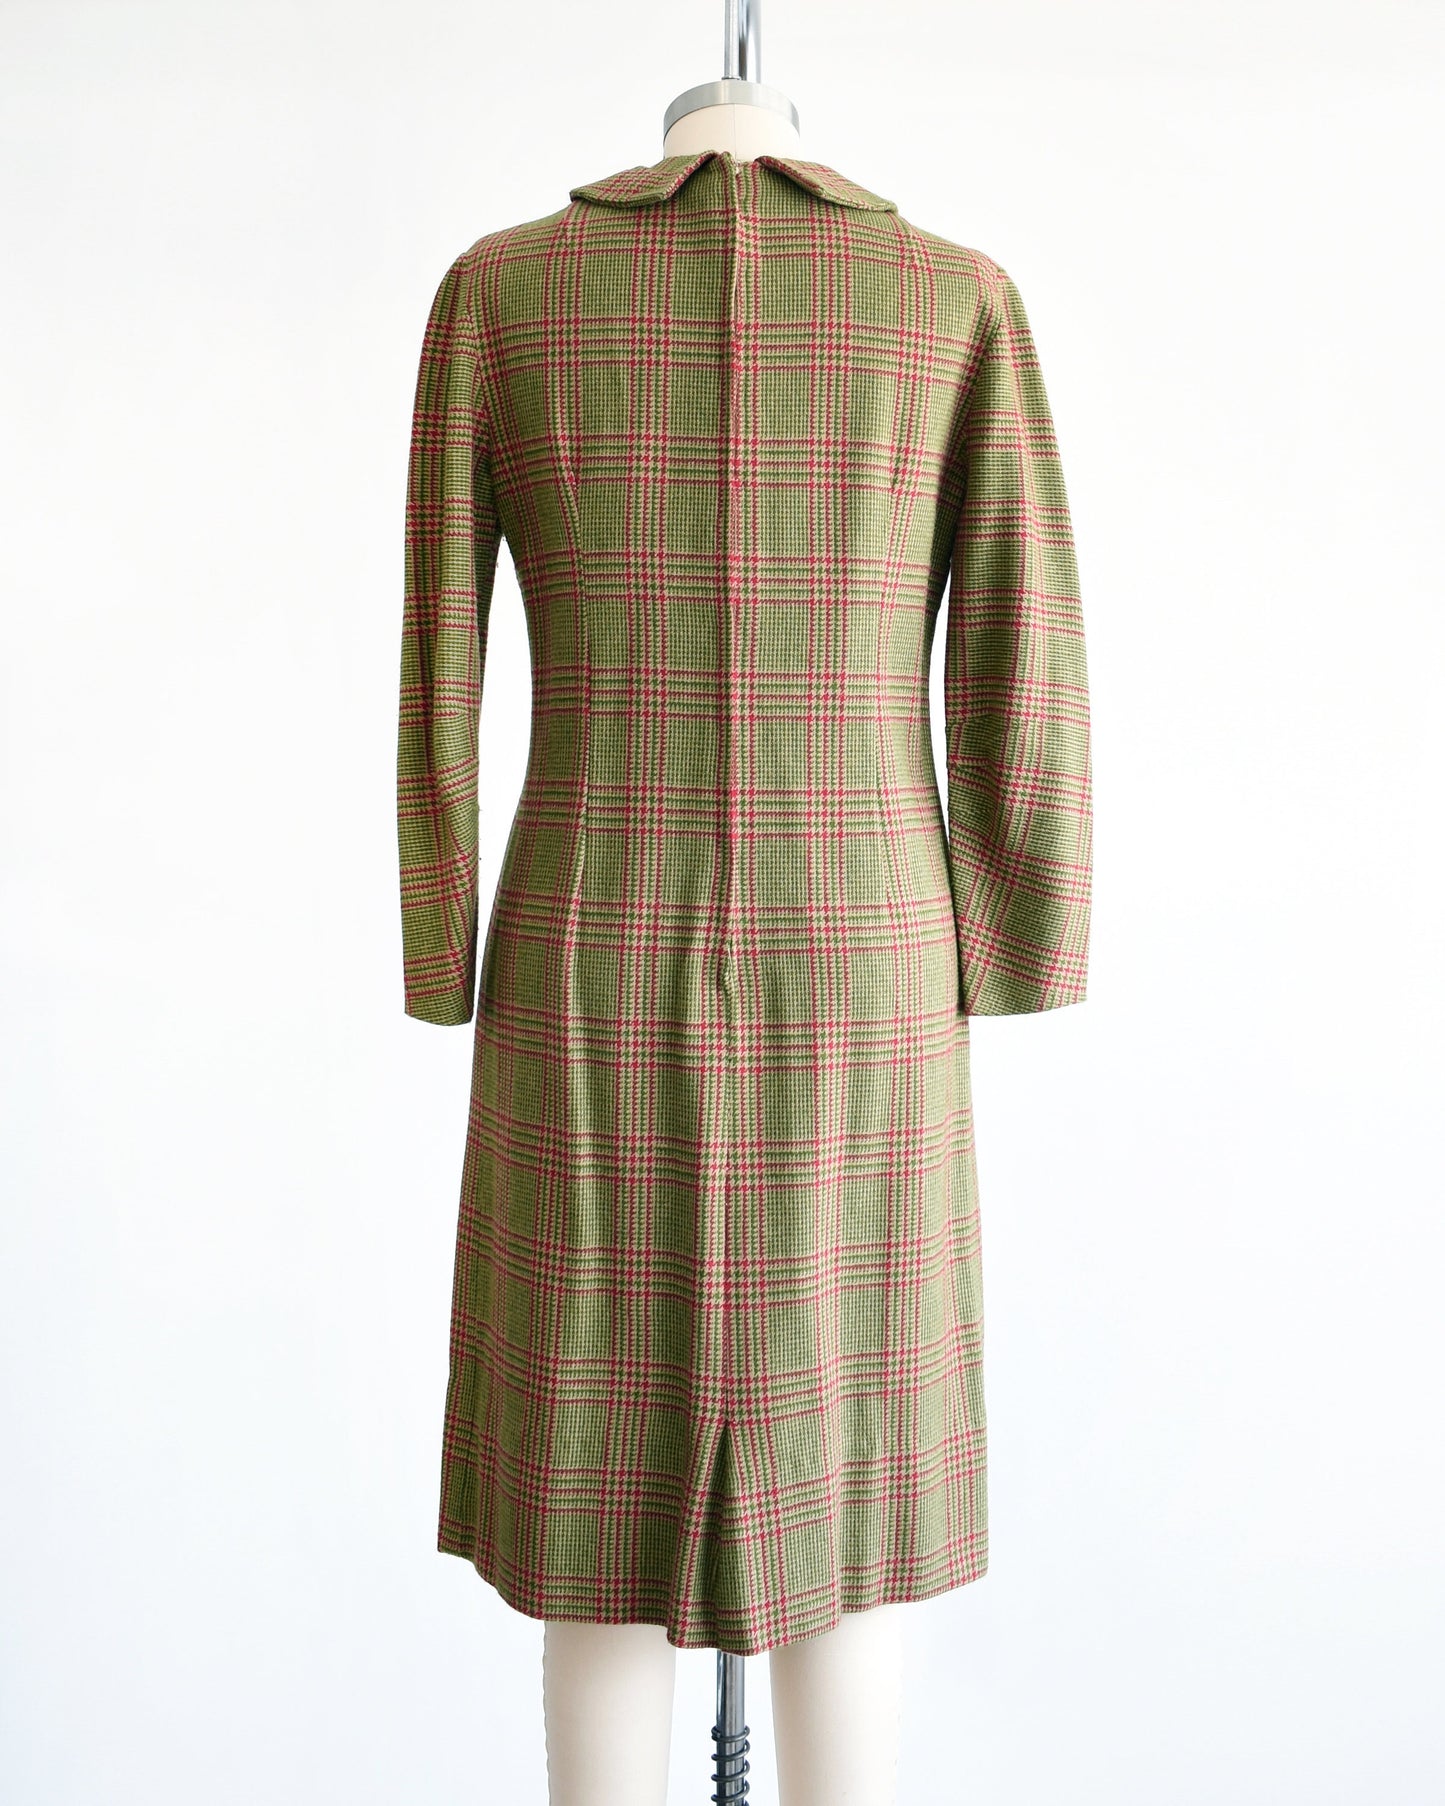 Back view of a vintage 60s green and pink plaid wool dress with Peter Pan style collar and long sleeves. The dress is modeled on a dress form.